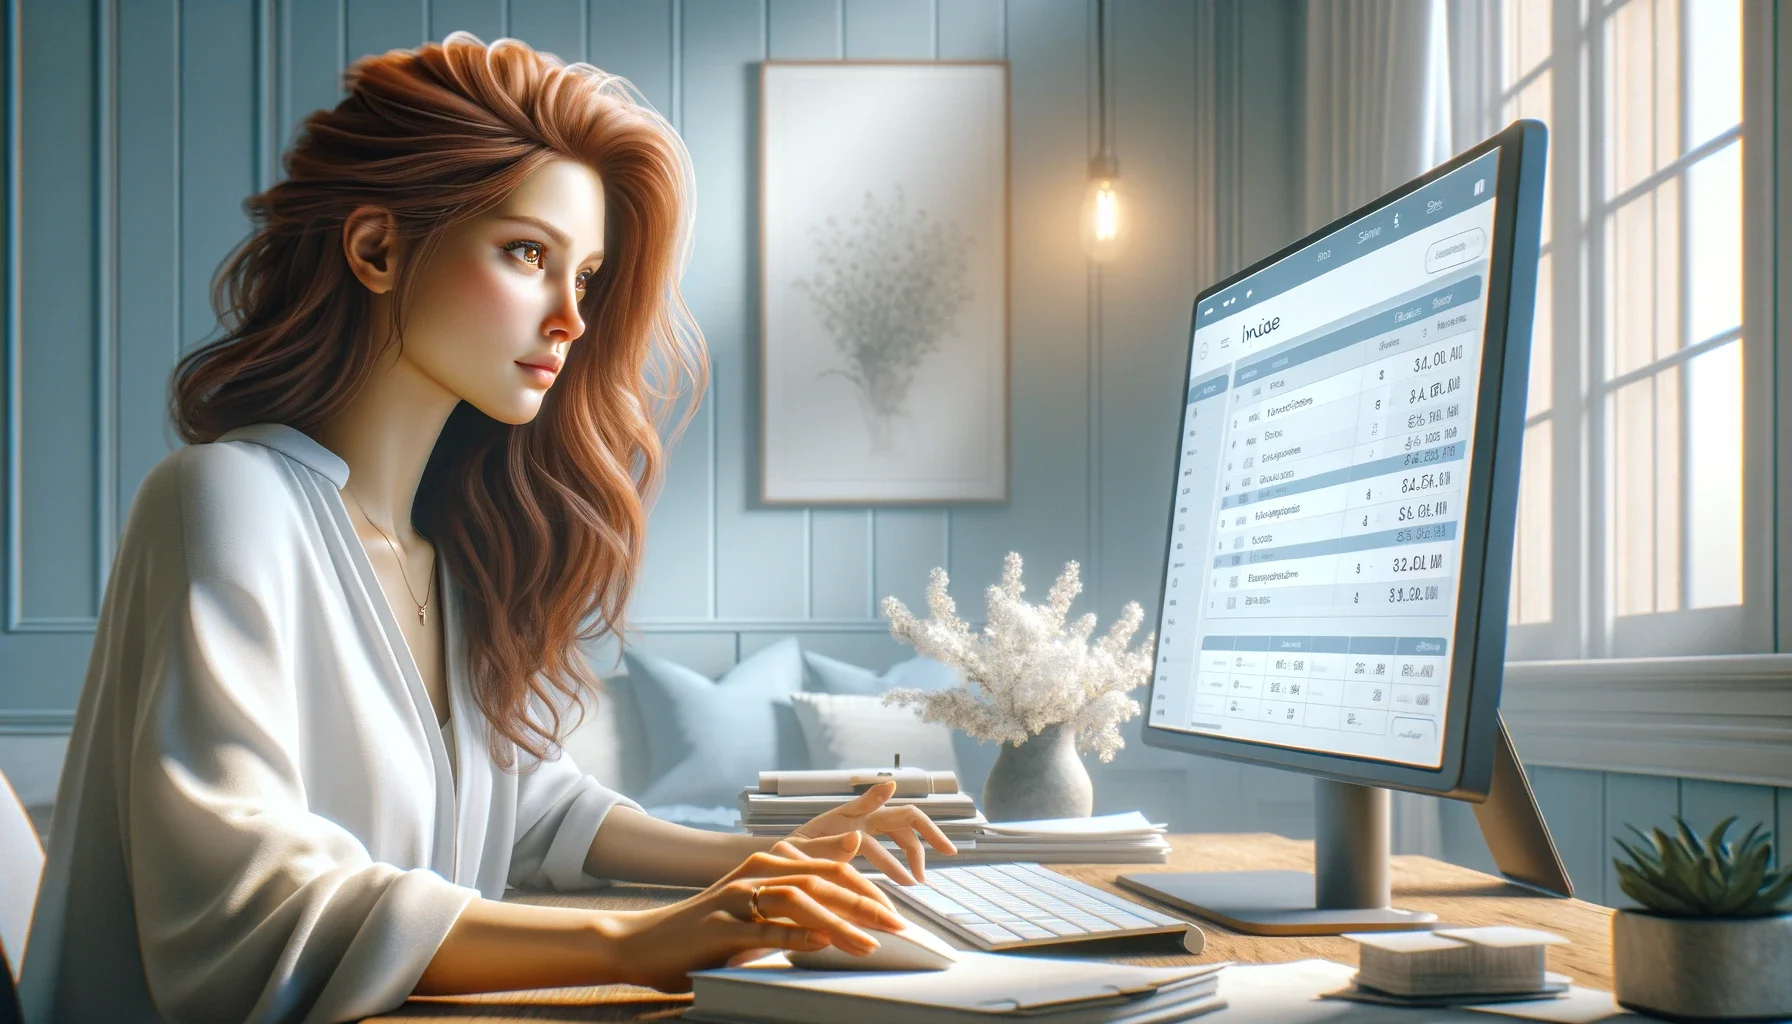 A beautiful girl using Invoice processing software on her computer